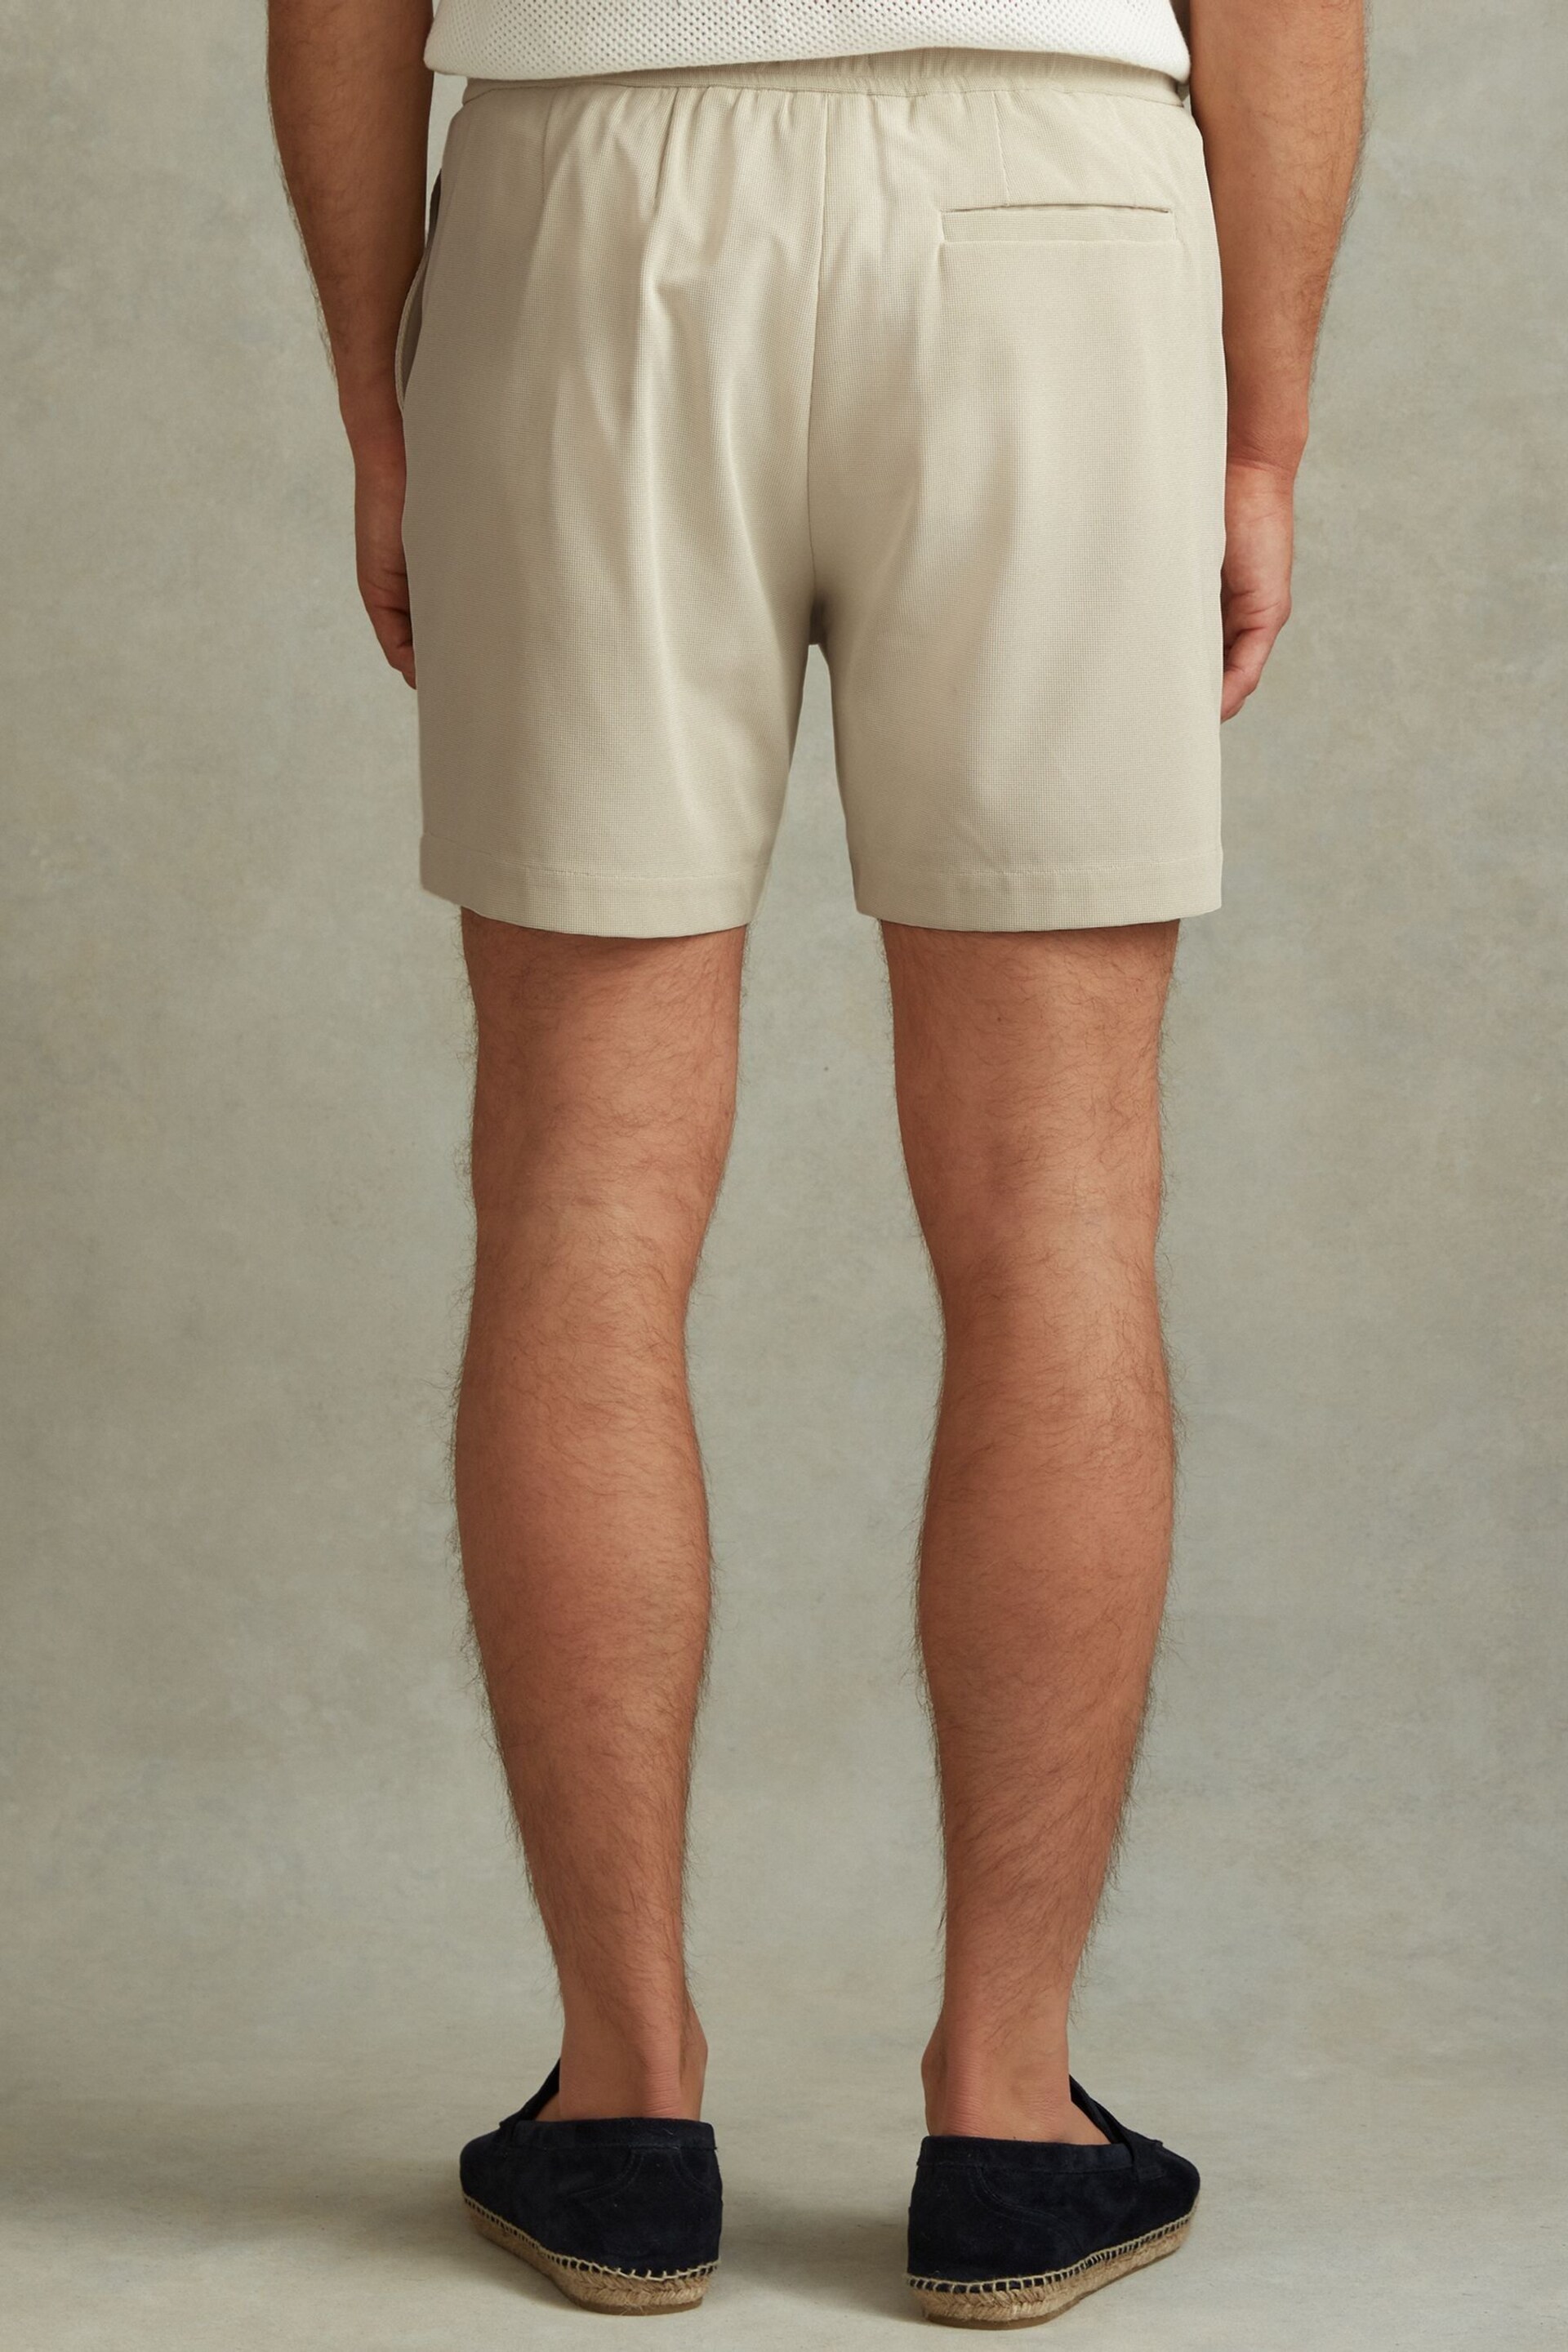 Reiss Stone Newmark Textured Drawstring Shorts - Image 4 of 5